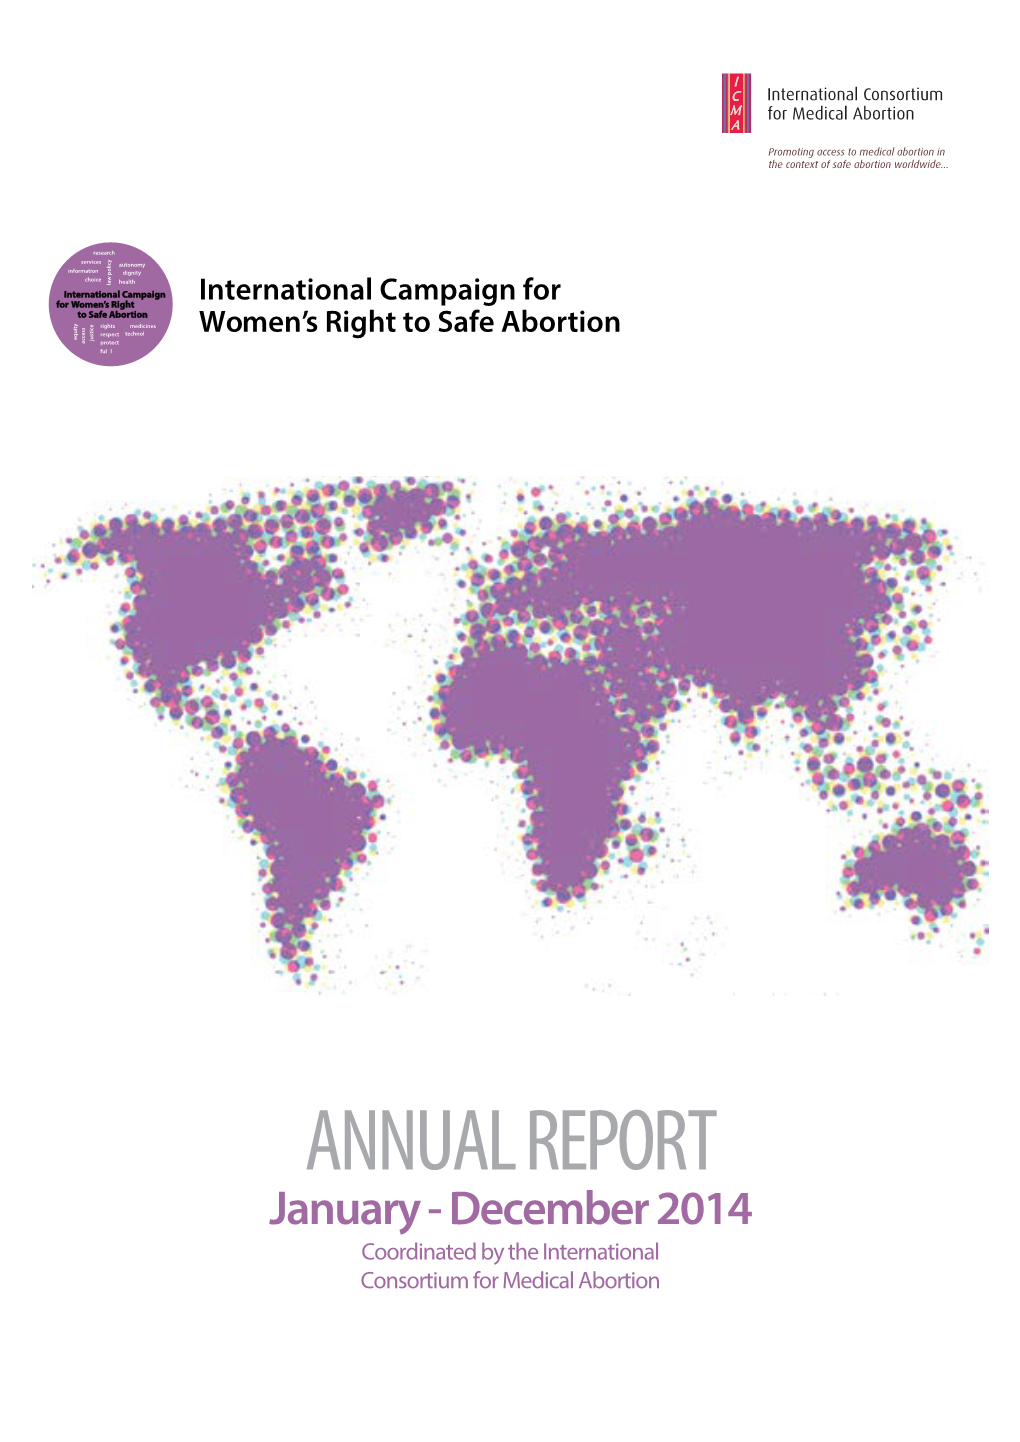 ANNUAL REPORT January - December 2014 Coordinated by the International Consortium for Medical Abortion